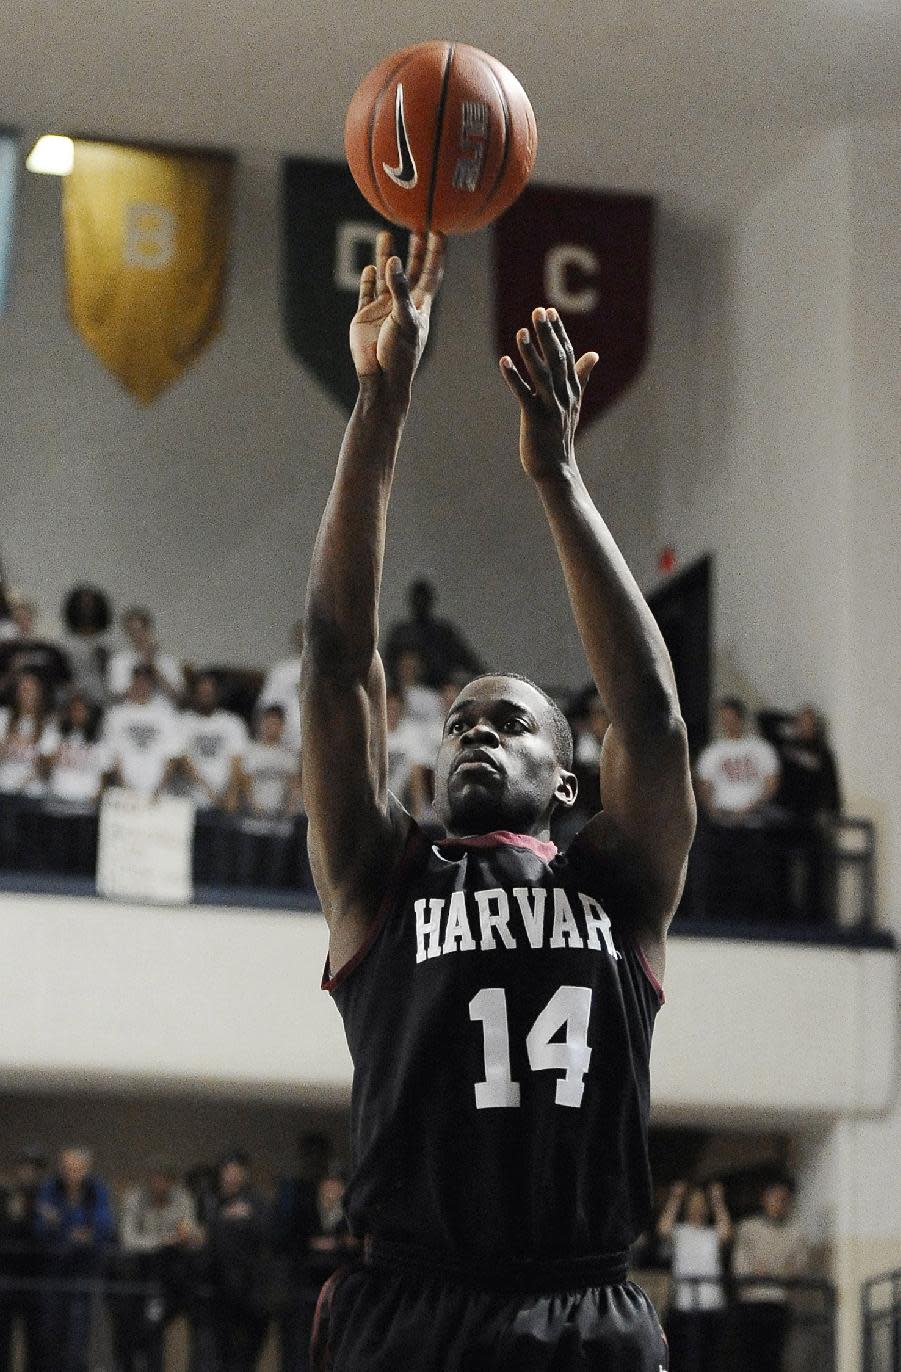 Harvard's Steve Moundou-Missi shoots during the first half of an NCAA college basketball game against Yale, Friday, March 7, 2014, in New Haven, Conn. (AP Photo/Jessica Hill)